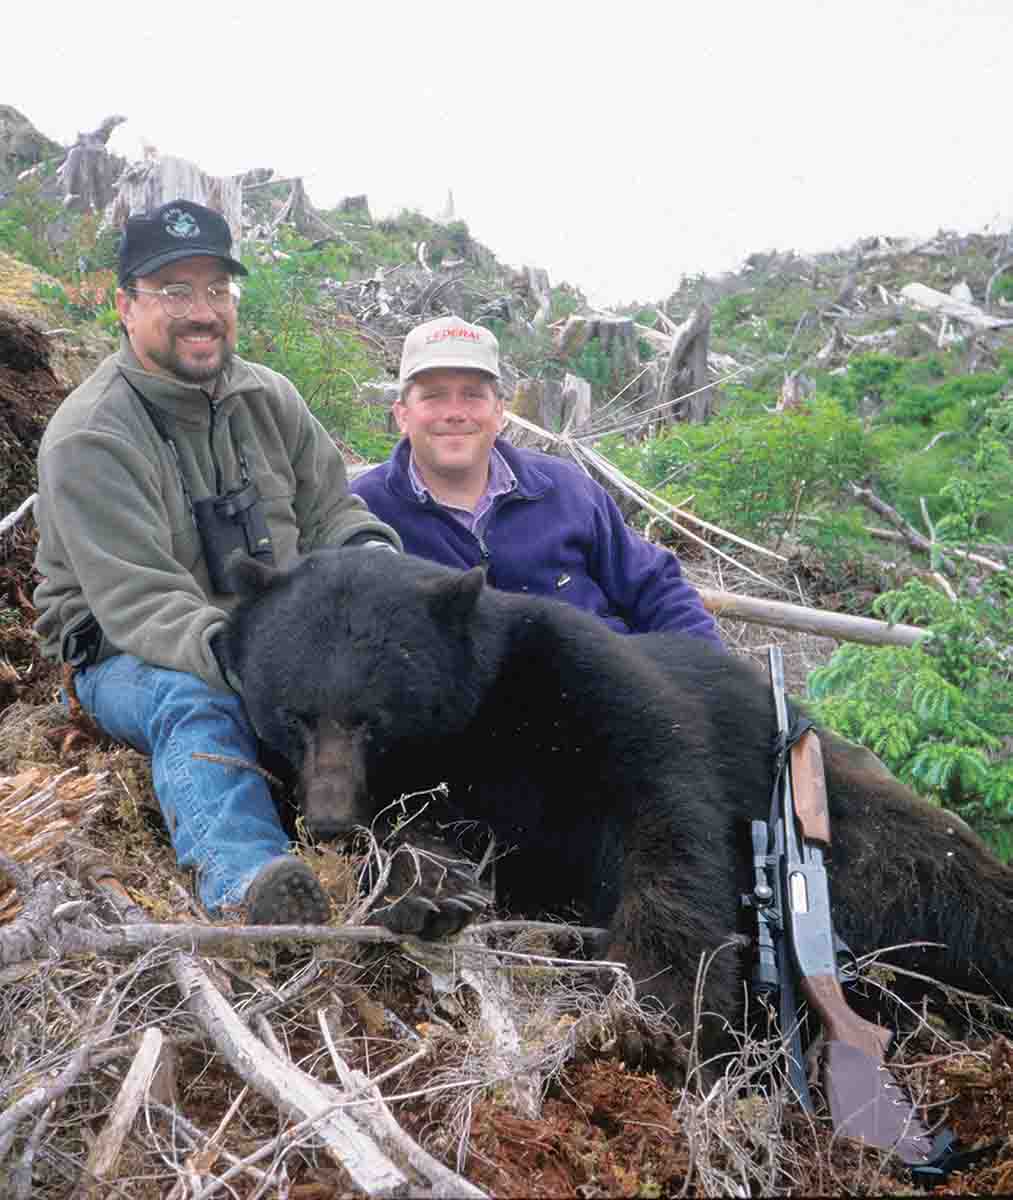 Few hunters refer to slug guns as big-bore rifles, but they are. John took this Vancouver Island black bear with a Federal slug from his old 870 Remington, with a bore diameter of over .70 caliber.